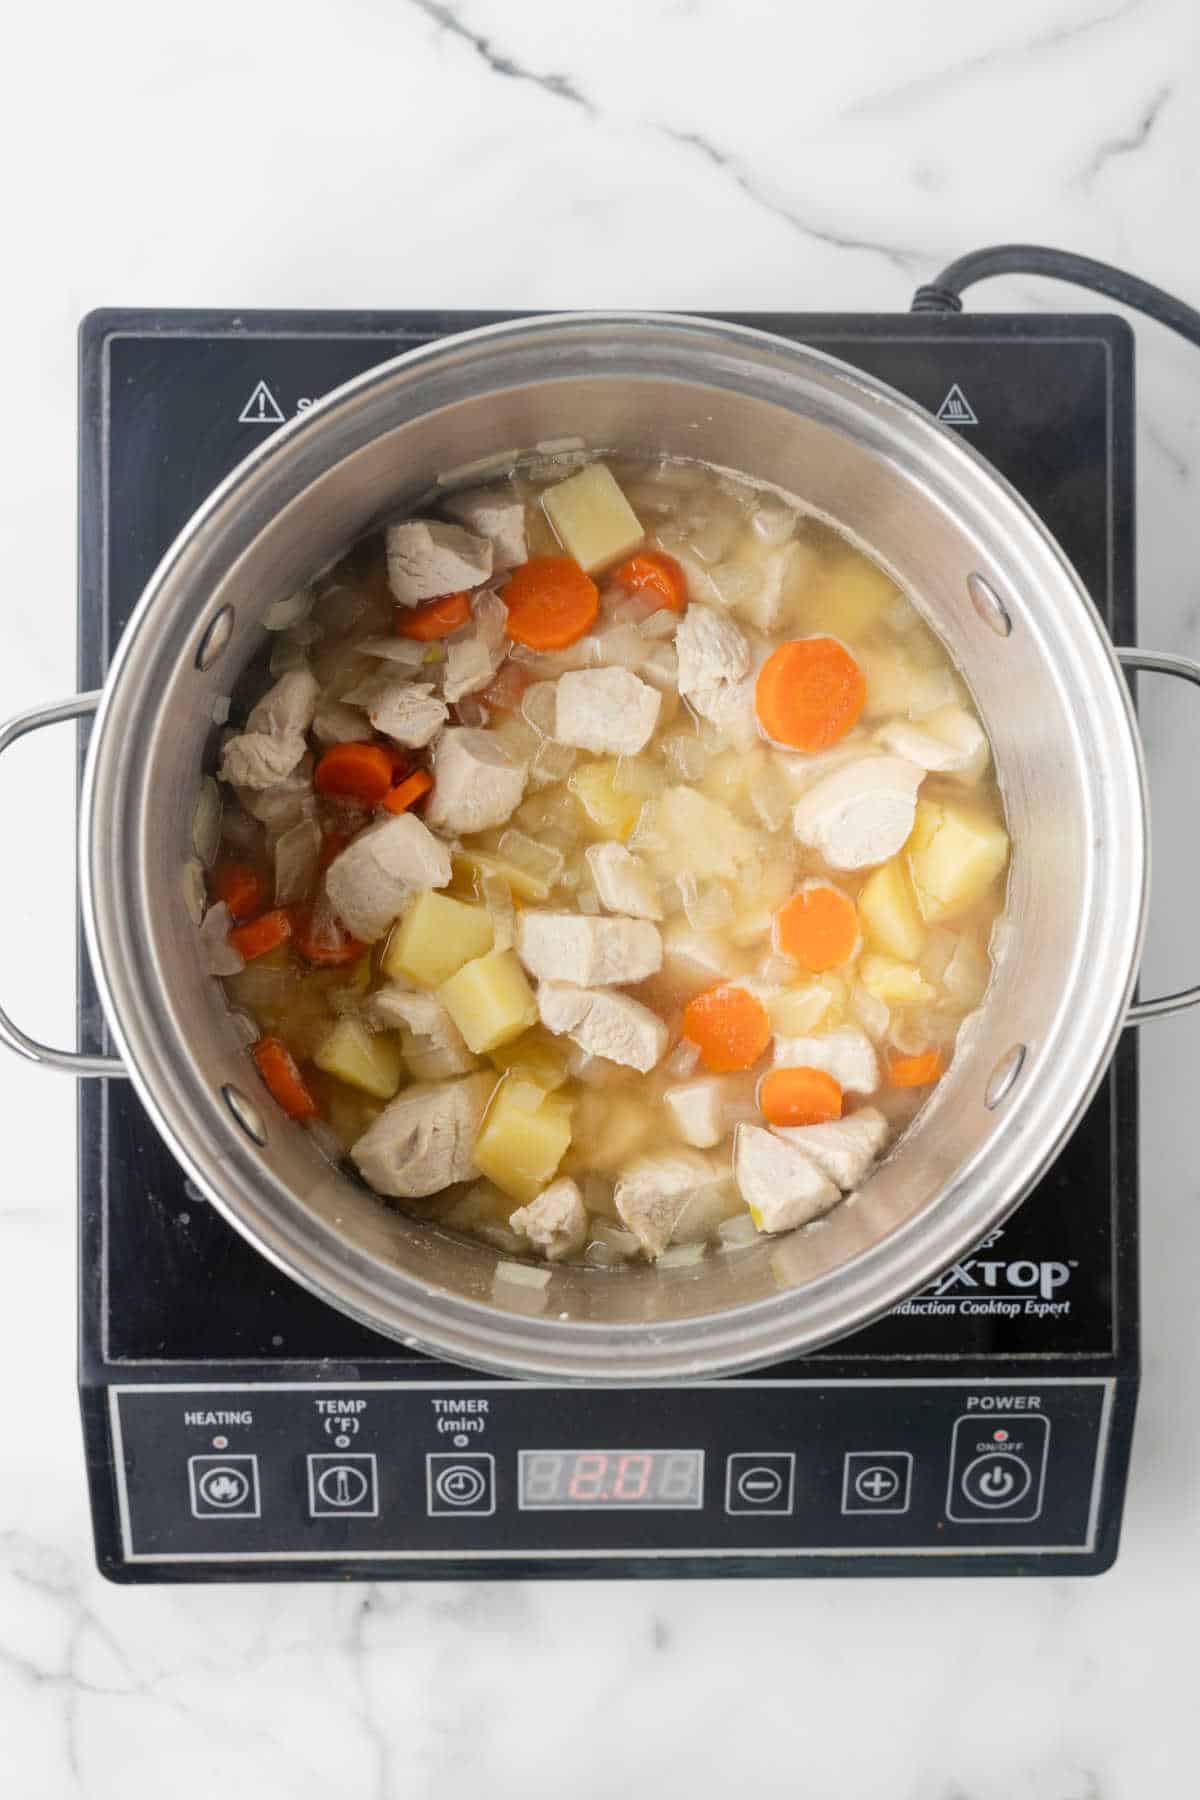 Chicken and veggies cooking in a pot of chicken broth.